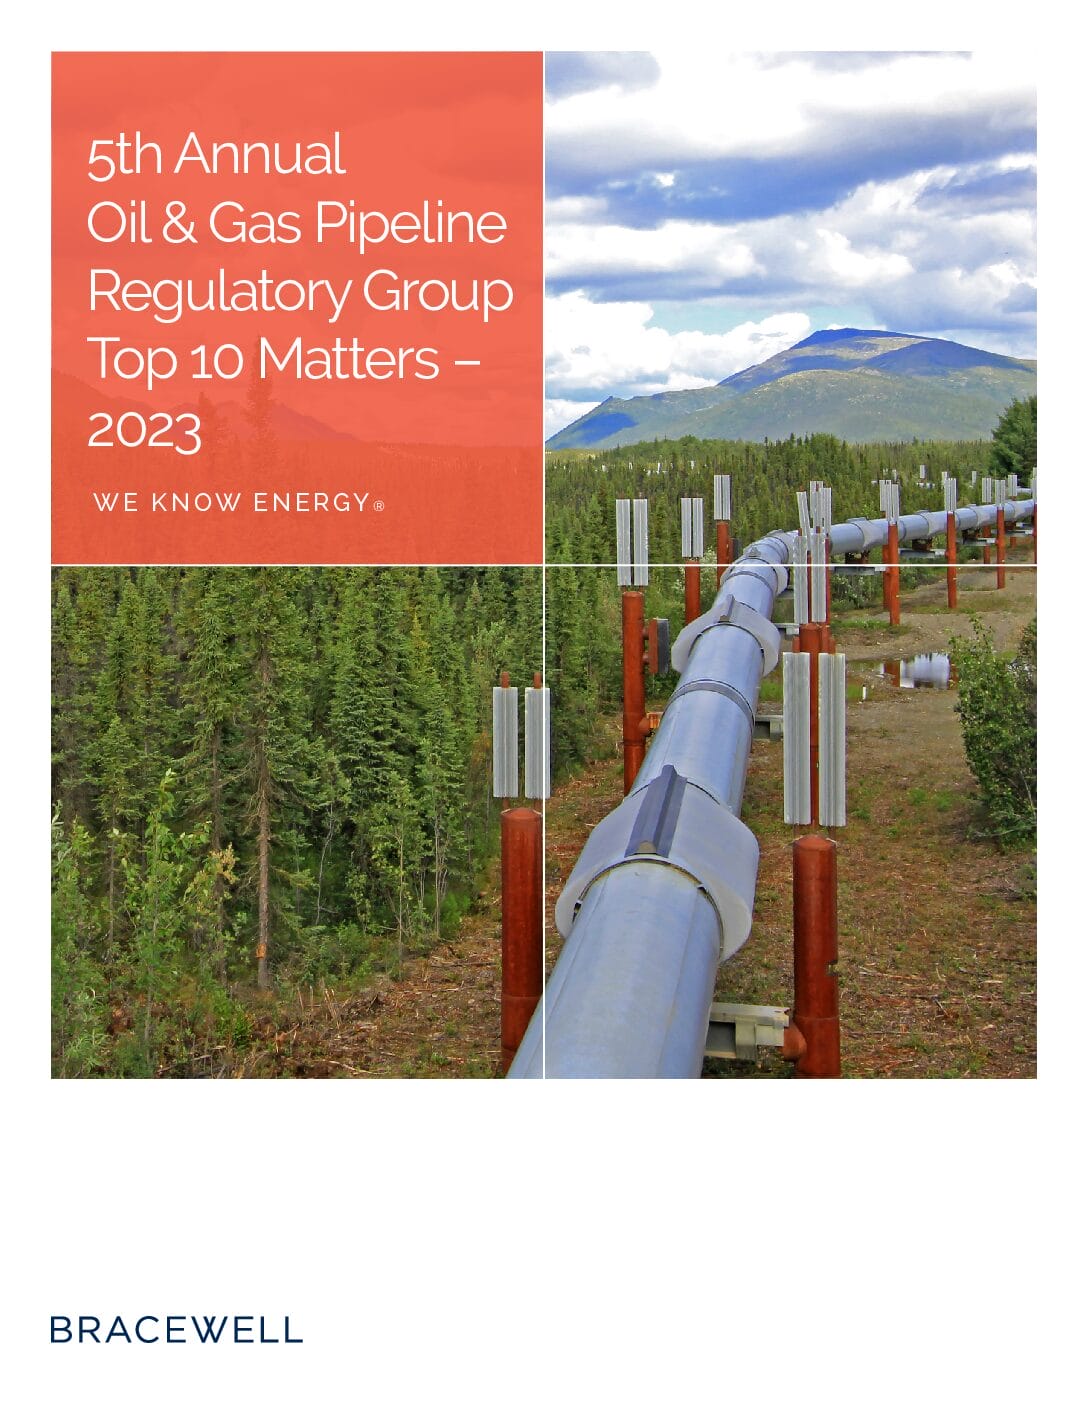 5TH ANNUAL OIL & GAS PIPELINE REGULATORY GROUP TOP 10 MATTERS